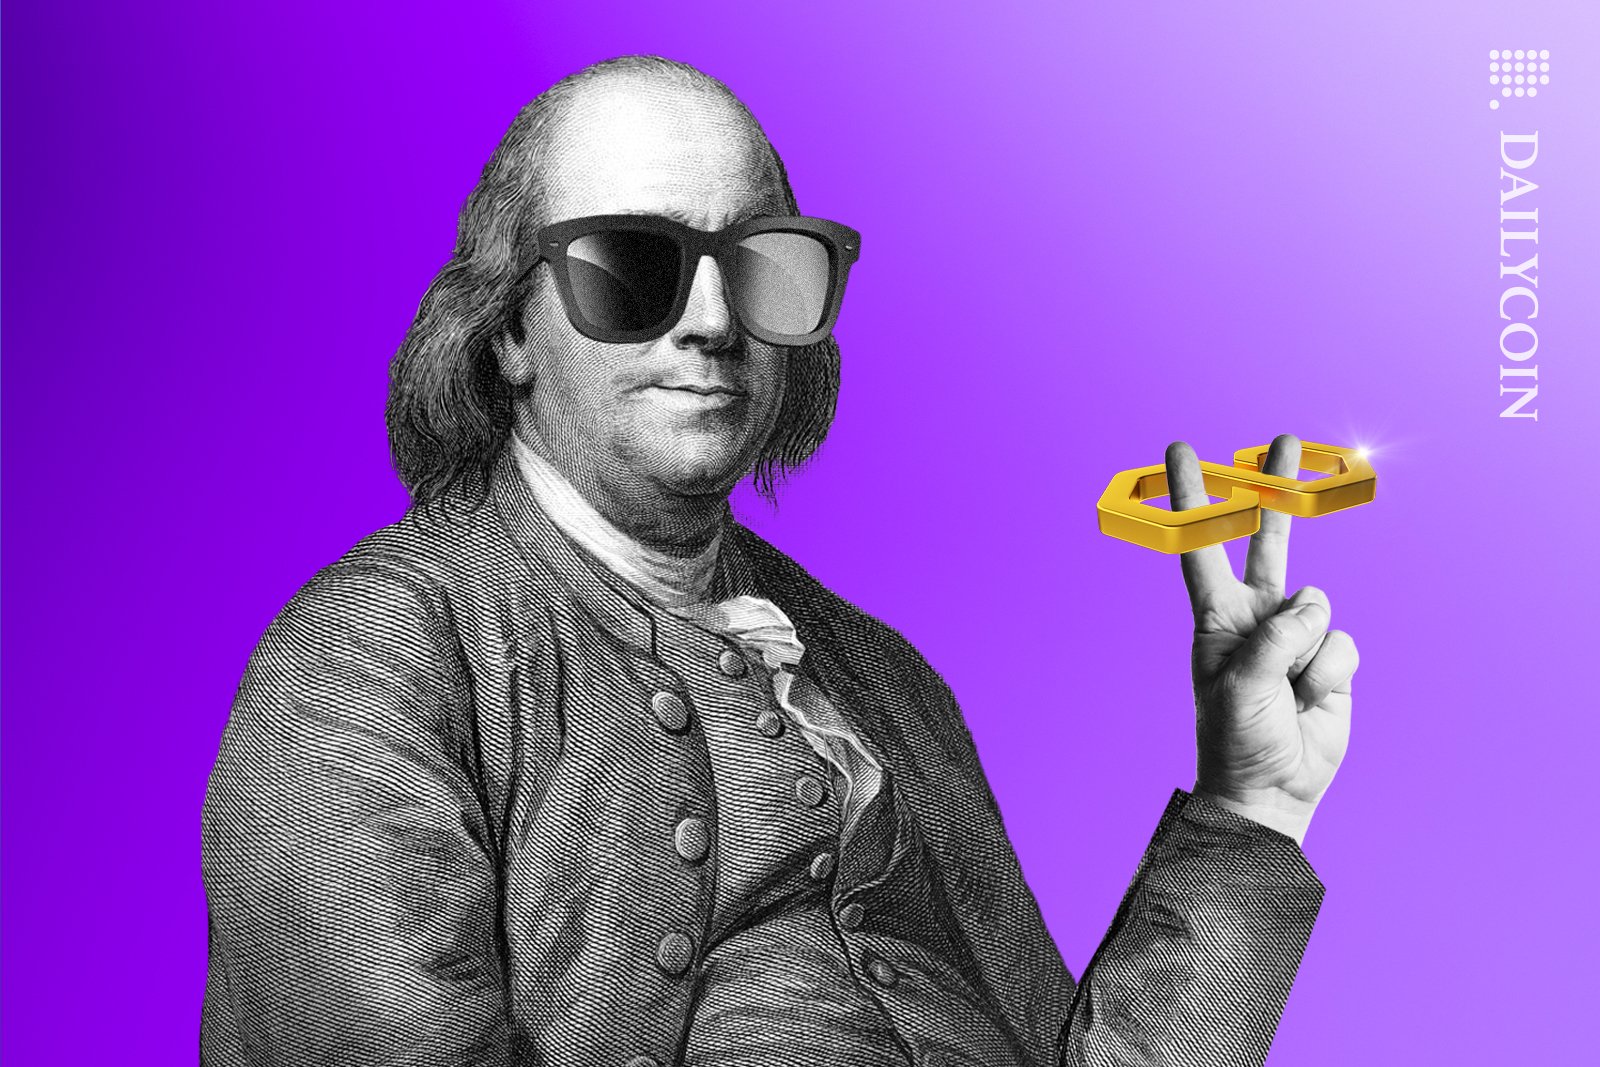 Benjamin franklin with sunglasses holding up a peace sign and polygon (MATIC) 3D logo on 2 fingers.